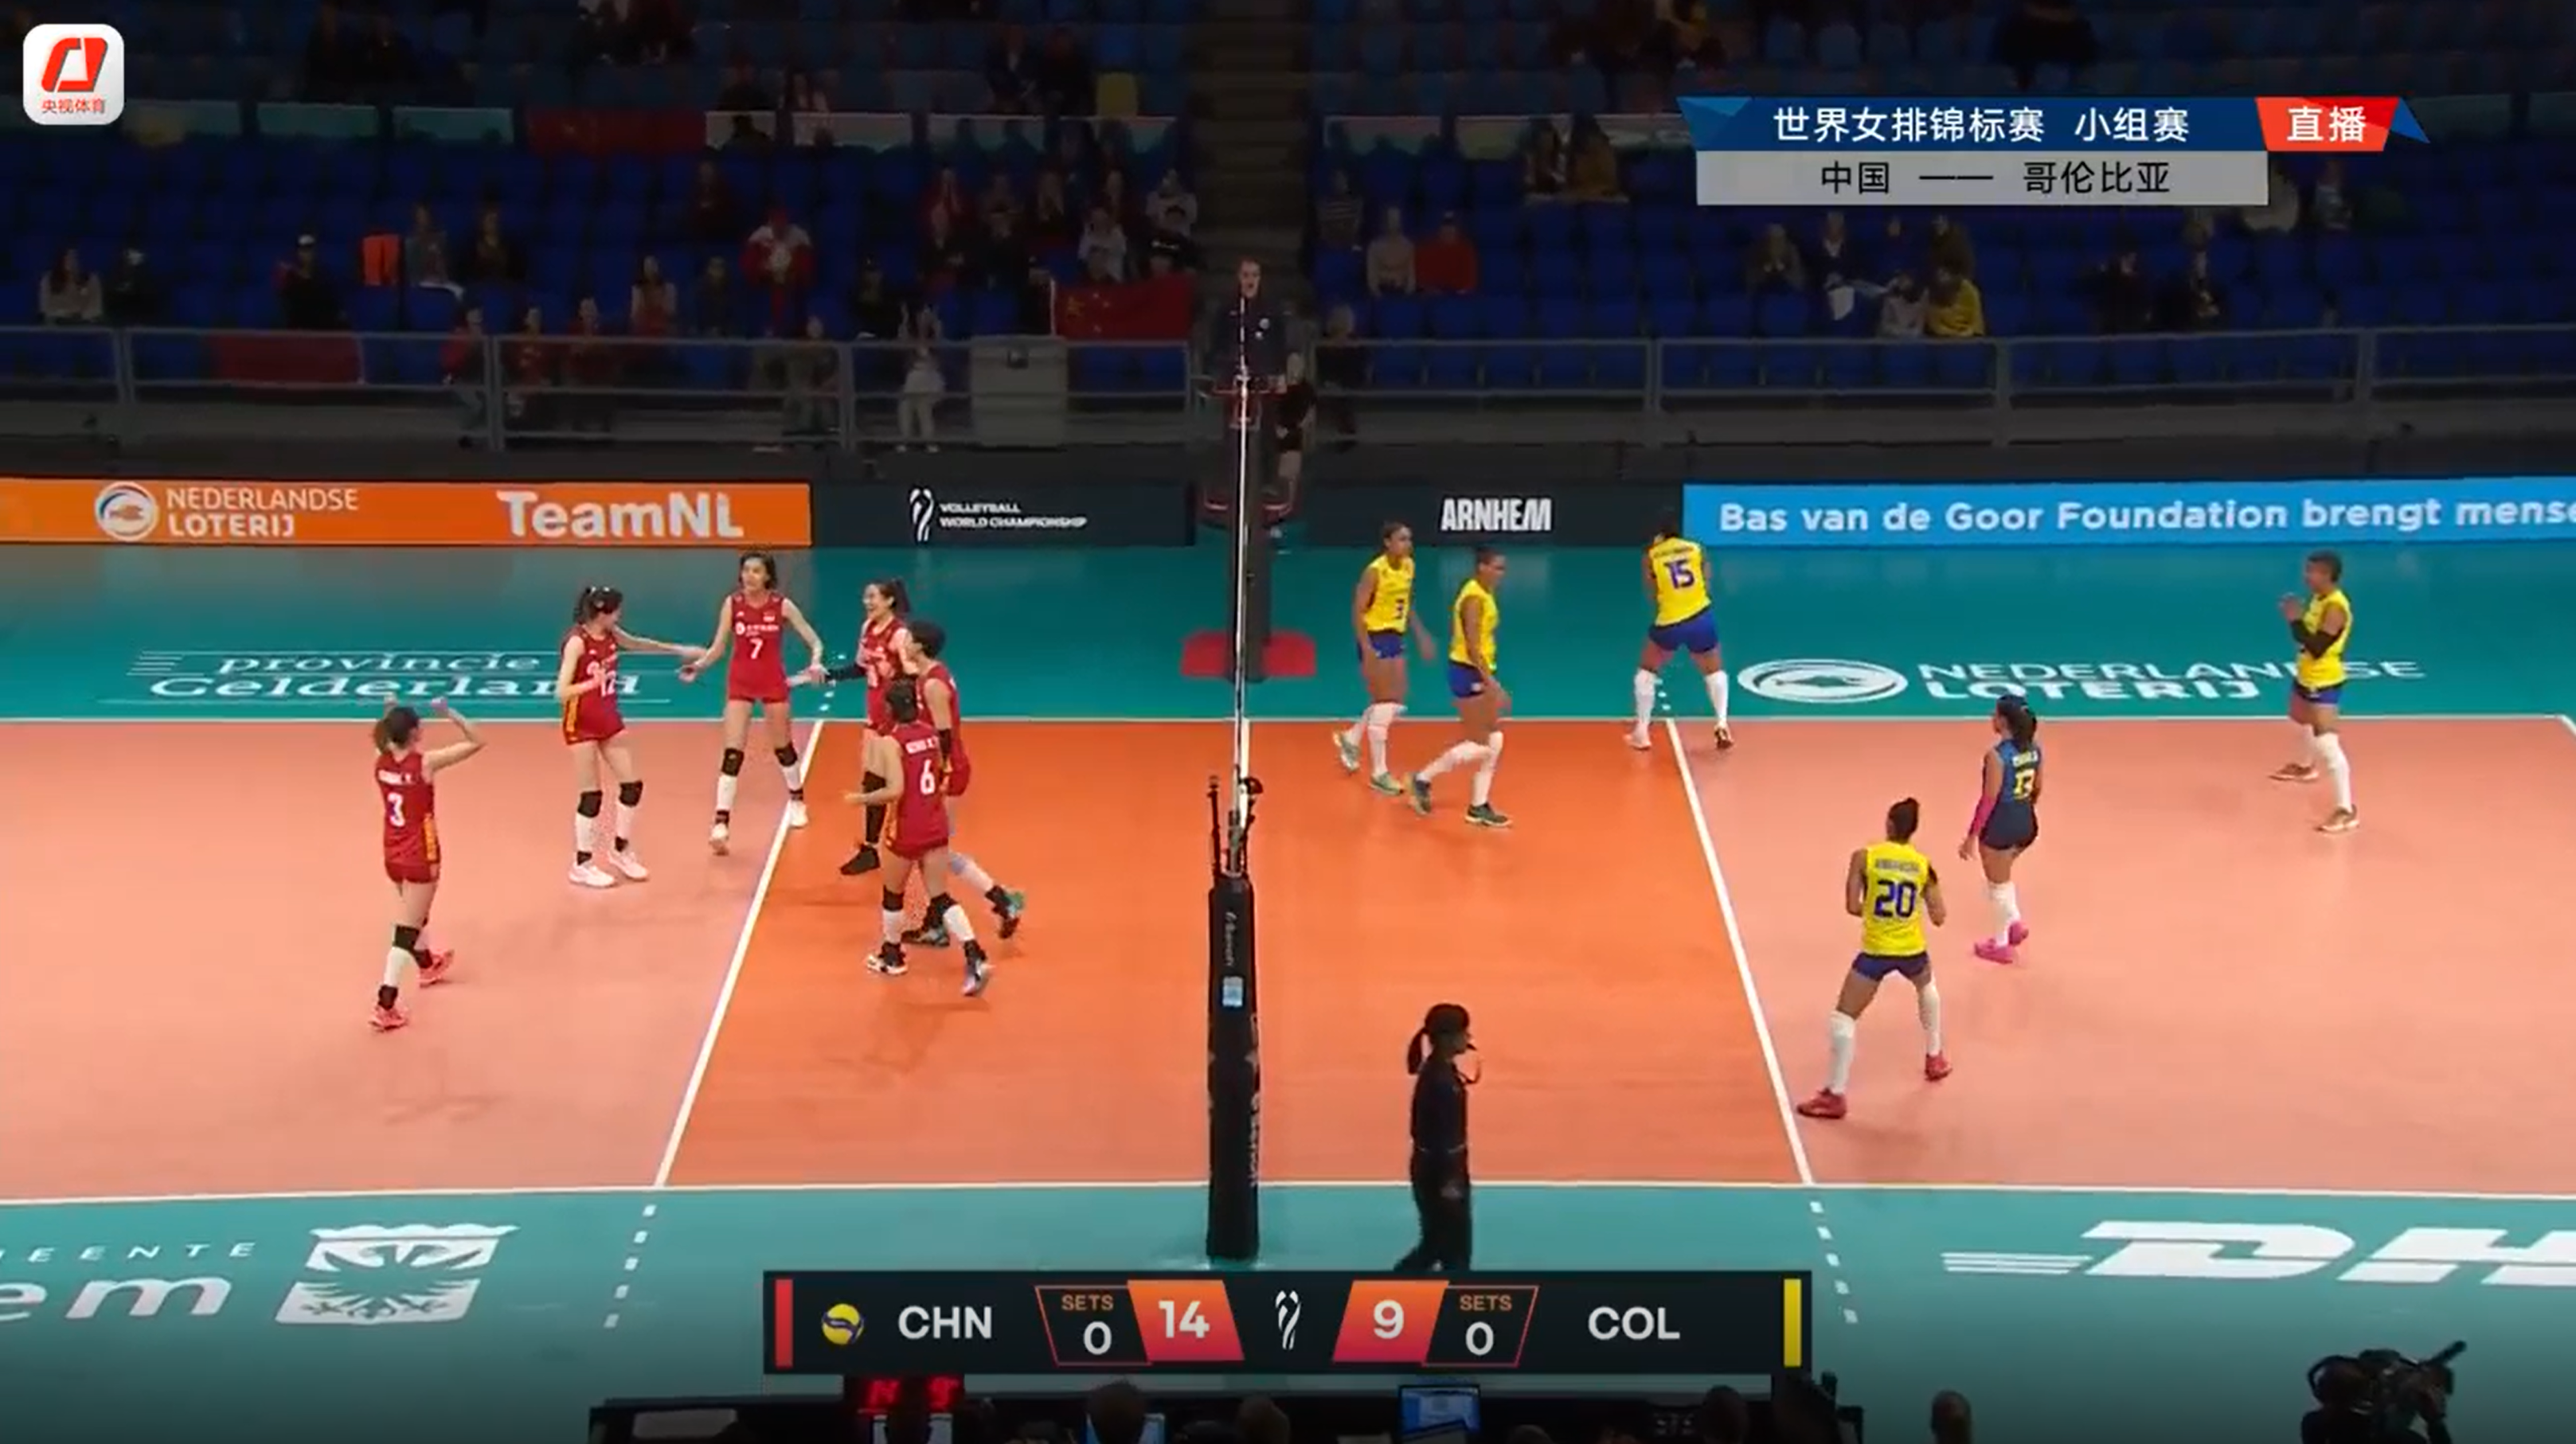 China (L) vs. Colombia in the FIVB Women's Volleyball World Championship match in Arnhem, Netherlands, September 27, 2022. /CMG